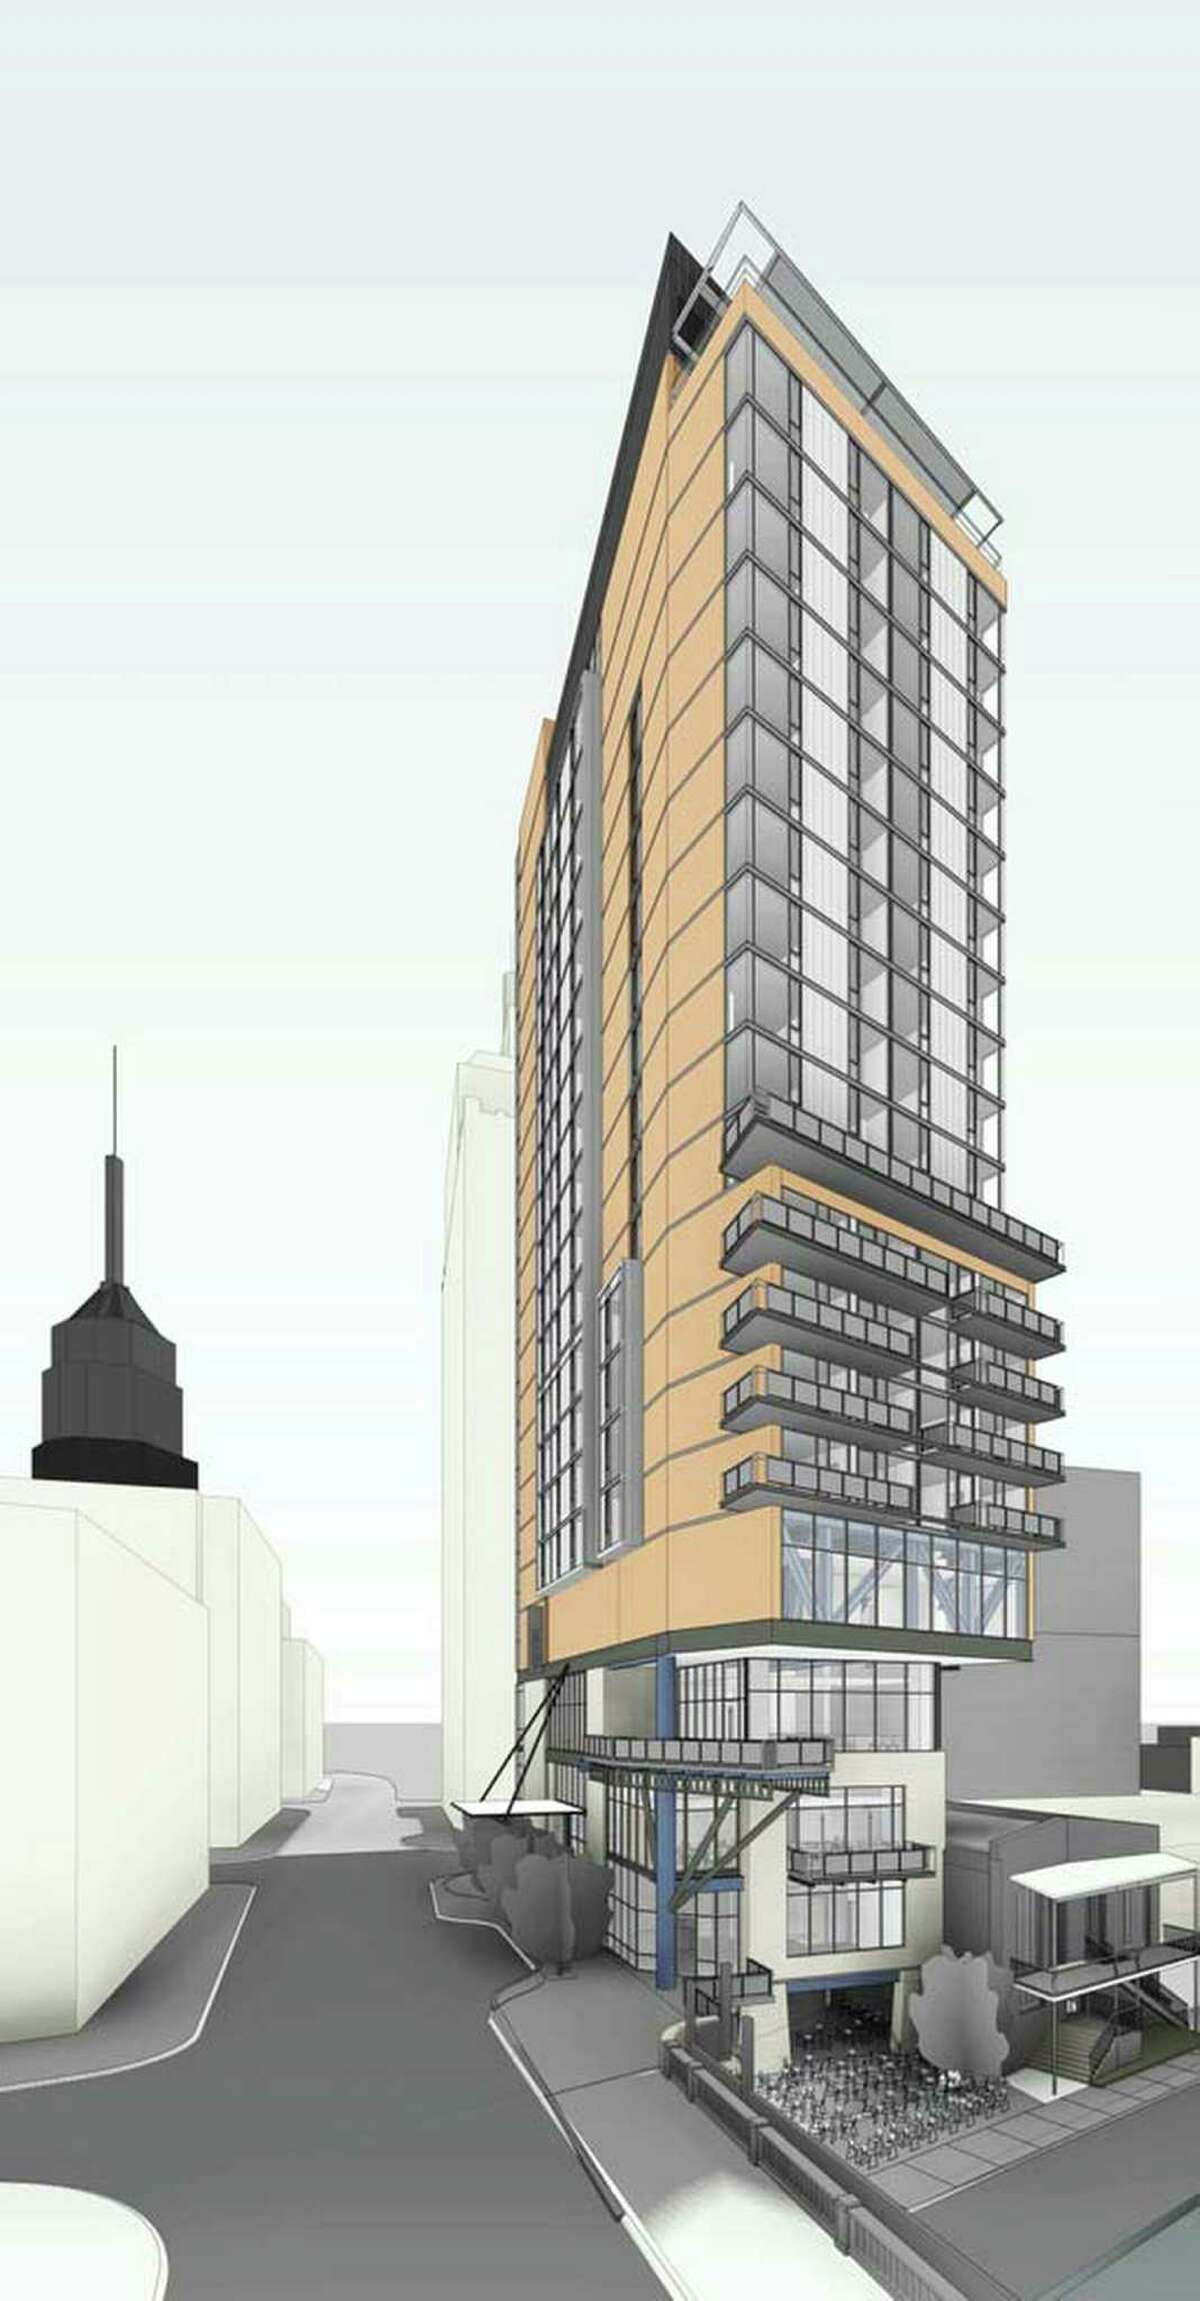 This is a rendering, provided Monday, Feb. 1, 2016 by the HDRC of the proposed Hilton Canopy Hotel. Crockett Urban Ventures filed paperwork with the Historic and Design Review Commission to demolish the historically designated building at 161 E. Commerce, commonly known as the Fishmarket building, which is owned by Chilton Restoration, LLC so they can construct what they are calling the Hilton Canopy Hotel which will be a 24 story hotel with 197 rooms according to the paperwork. Fishmarket Building APPLICANT: Crockett Urban Ventures OWNER: Chilton Restoration, LLC